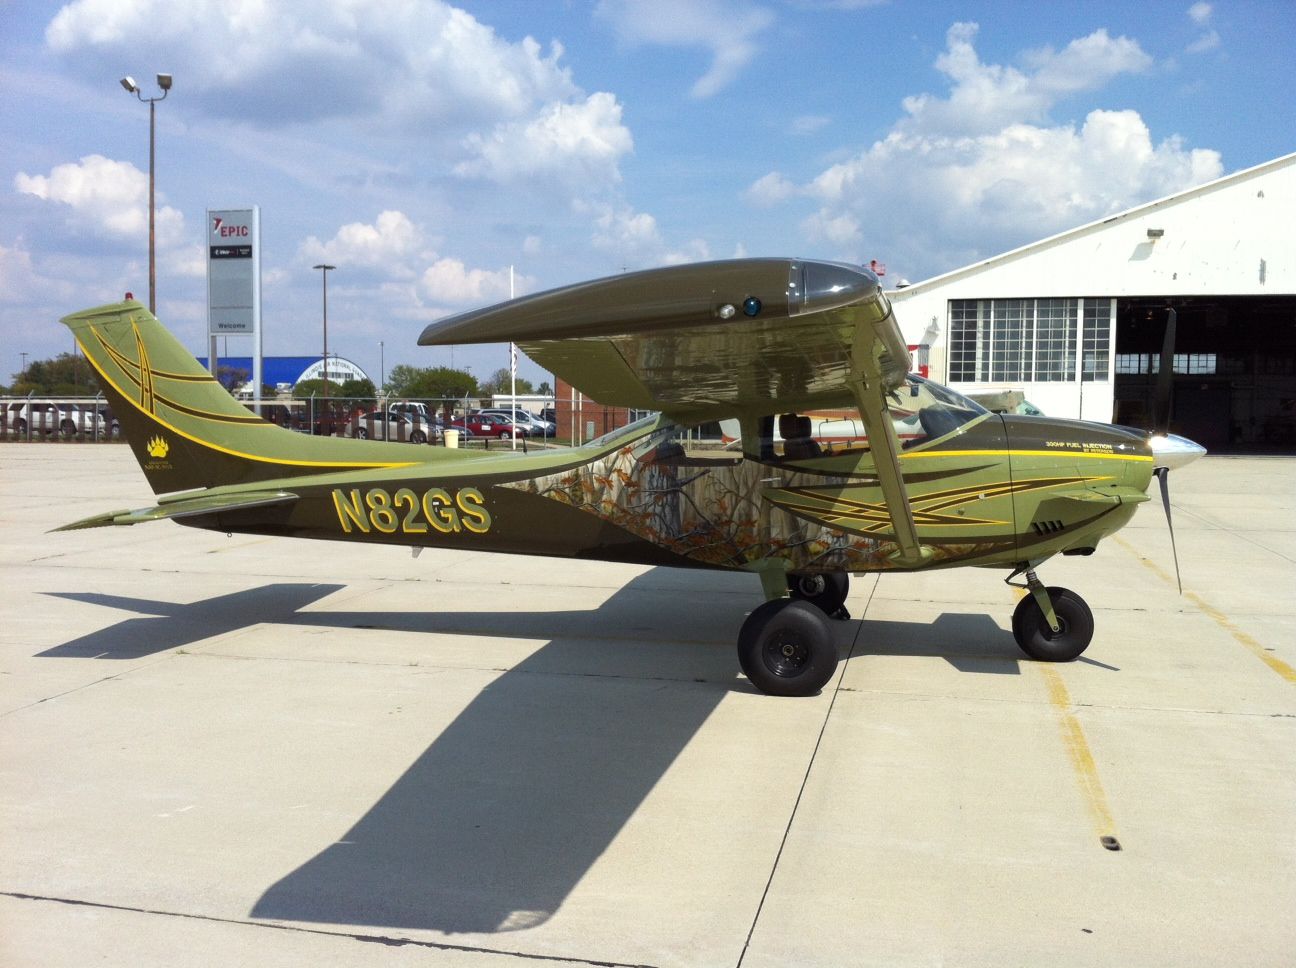 Cessna Skylane (N82GS) - This Skylane was seen at SPI with its special paint scheme.